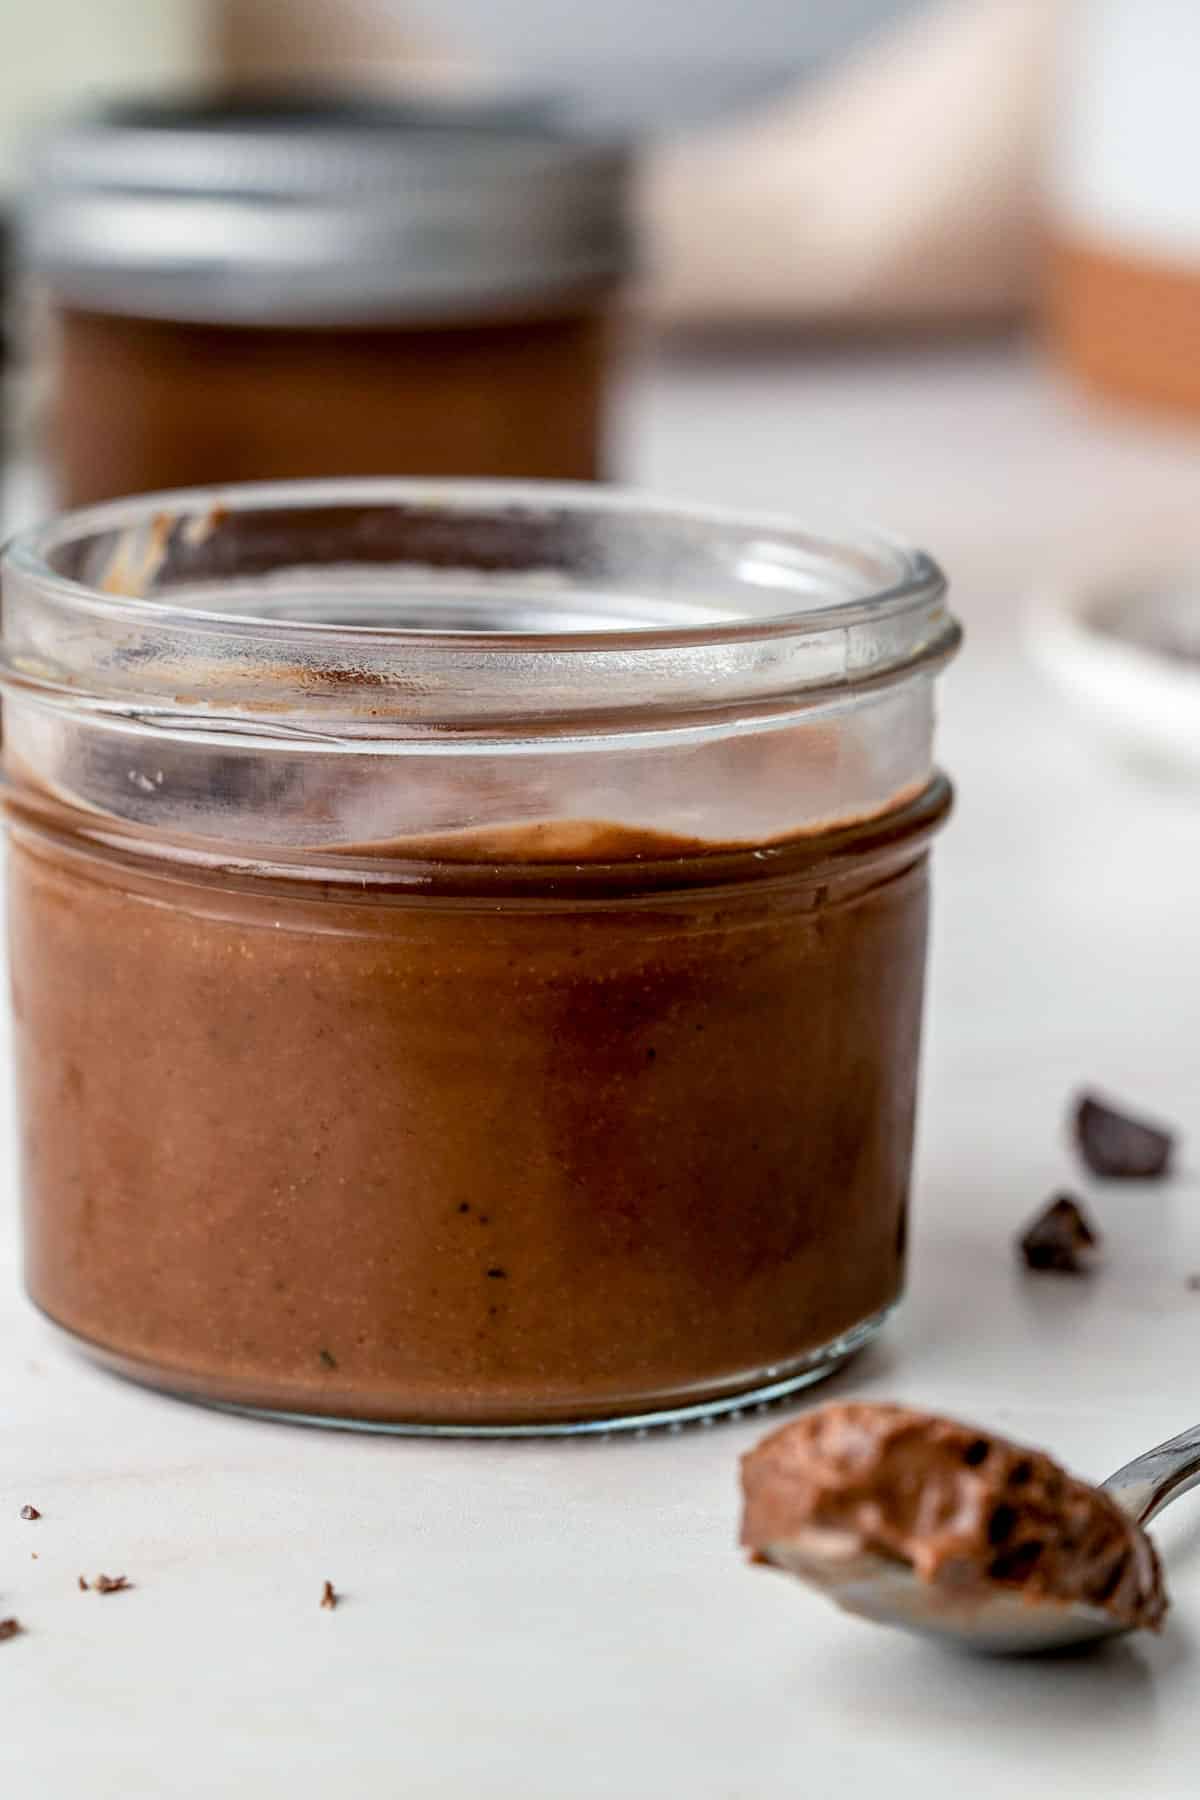 spoon of chocolate sitting next to a jar of chocolate dessert